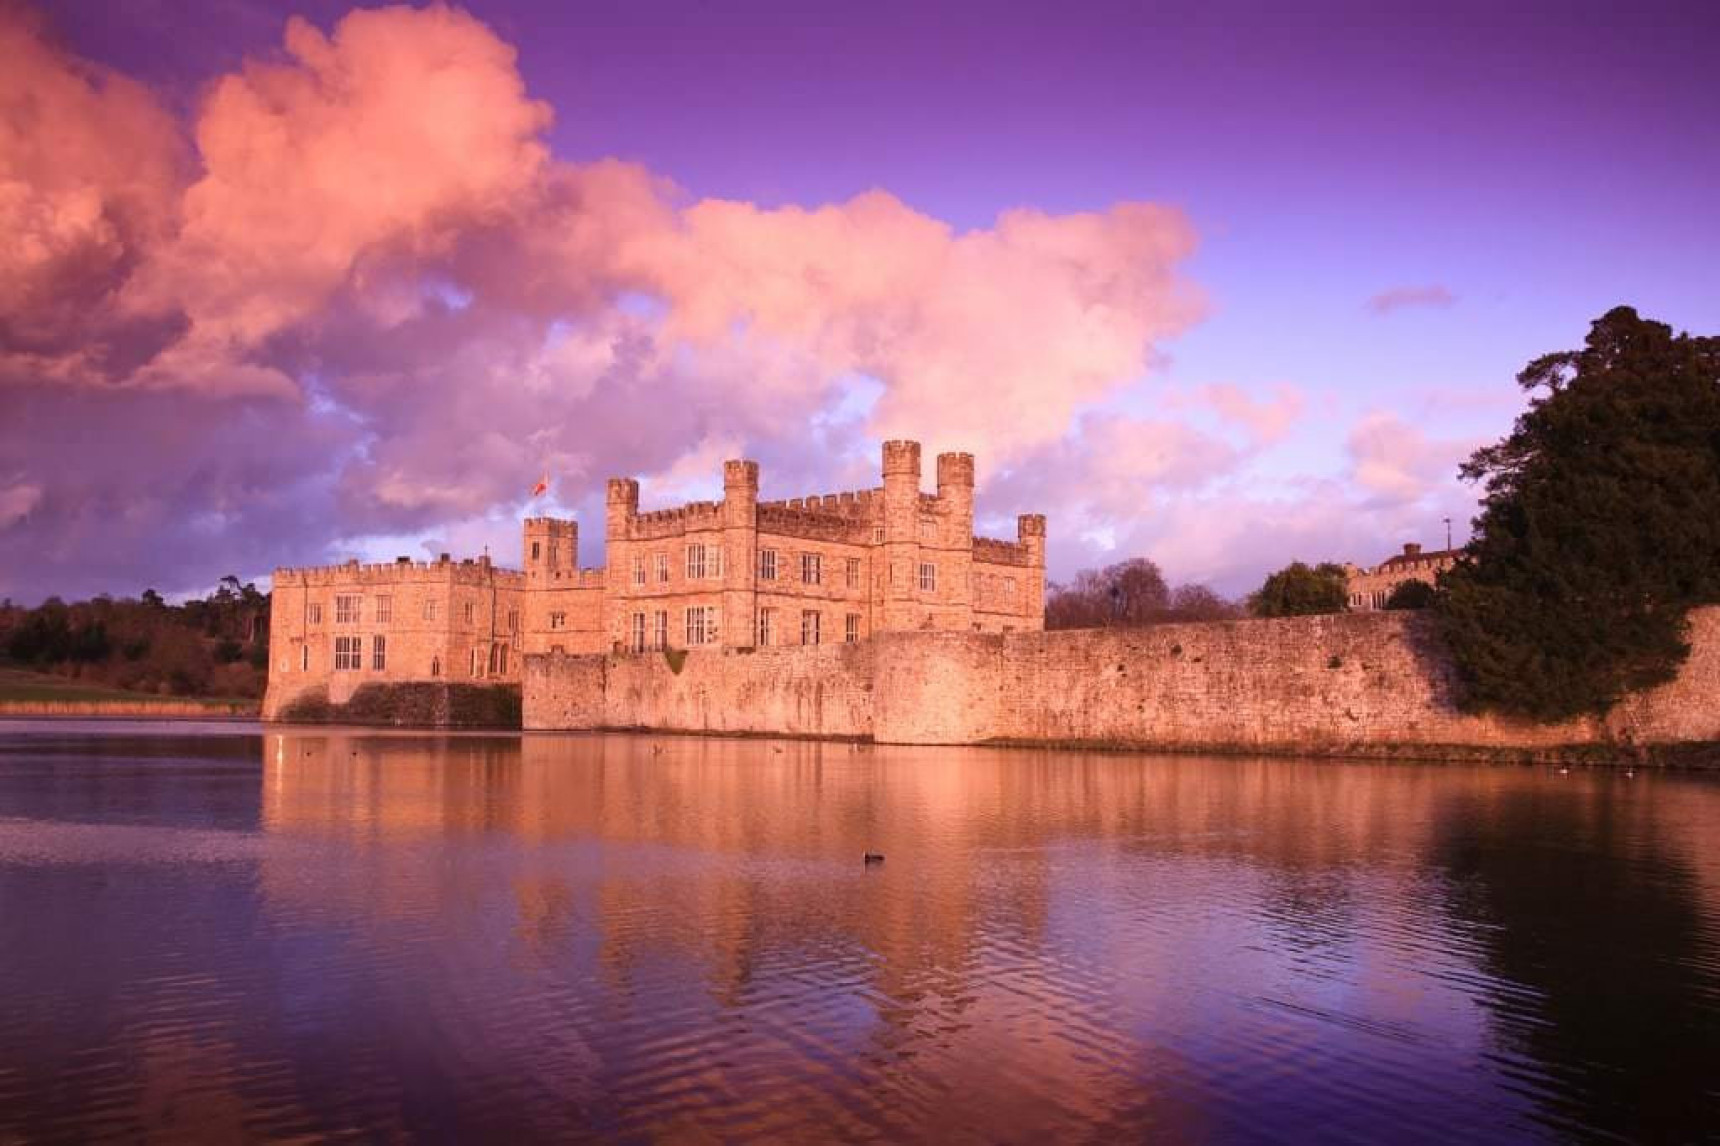 Leeds castle at sunset with pink clouds